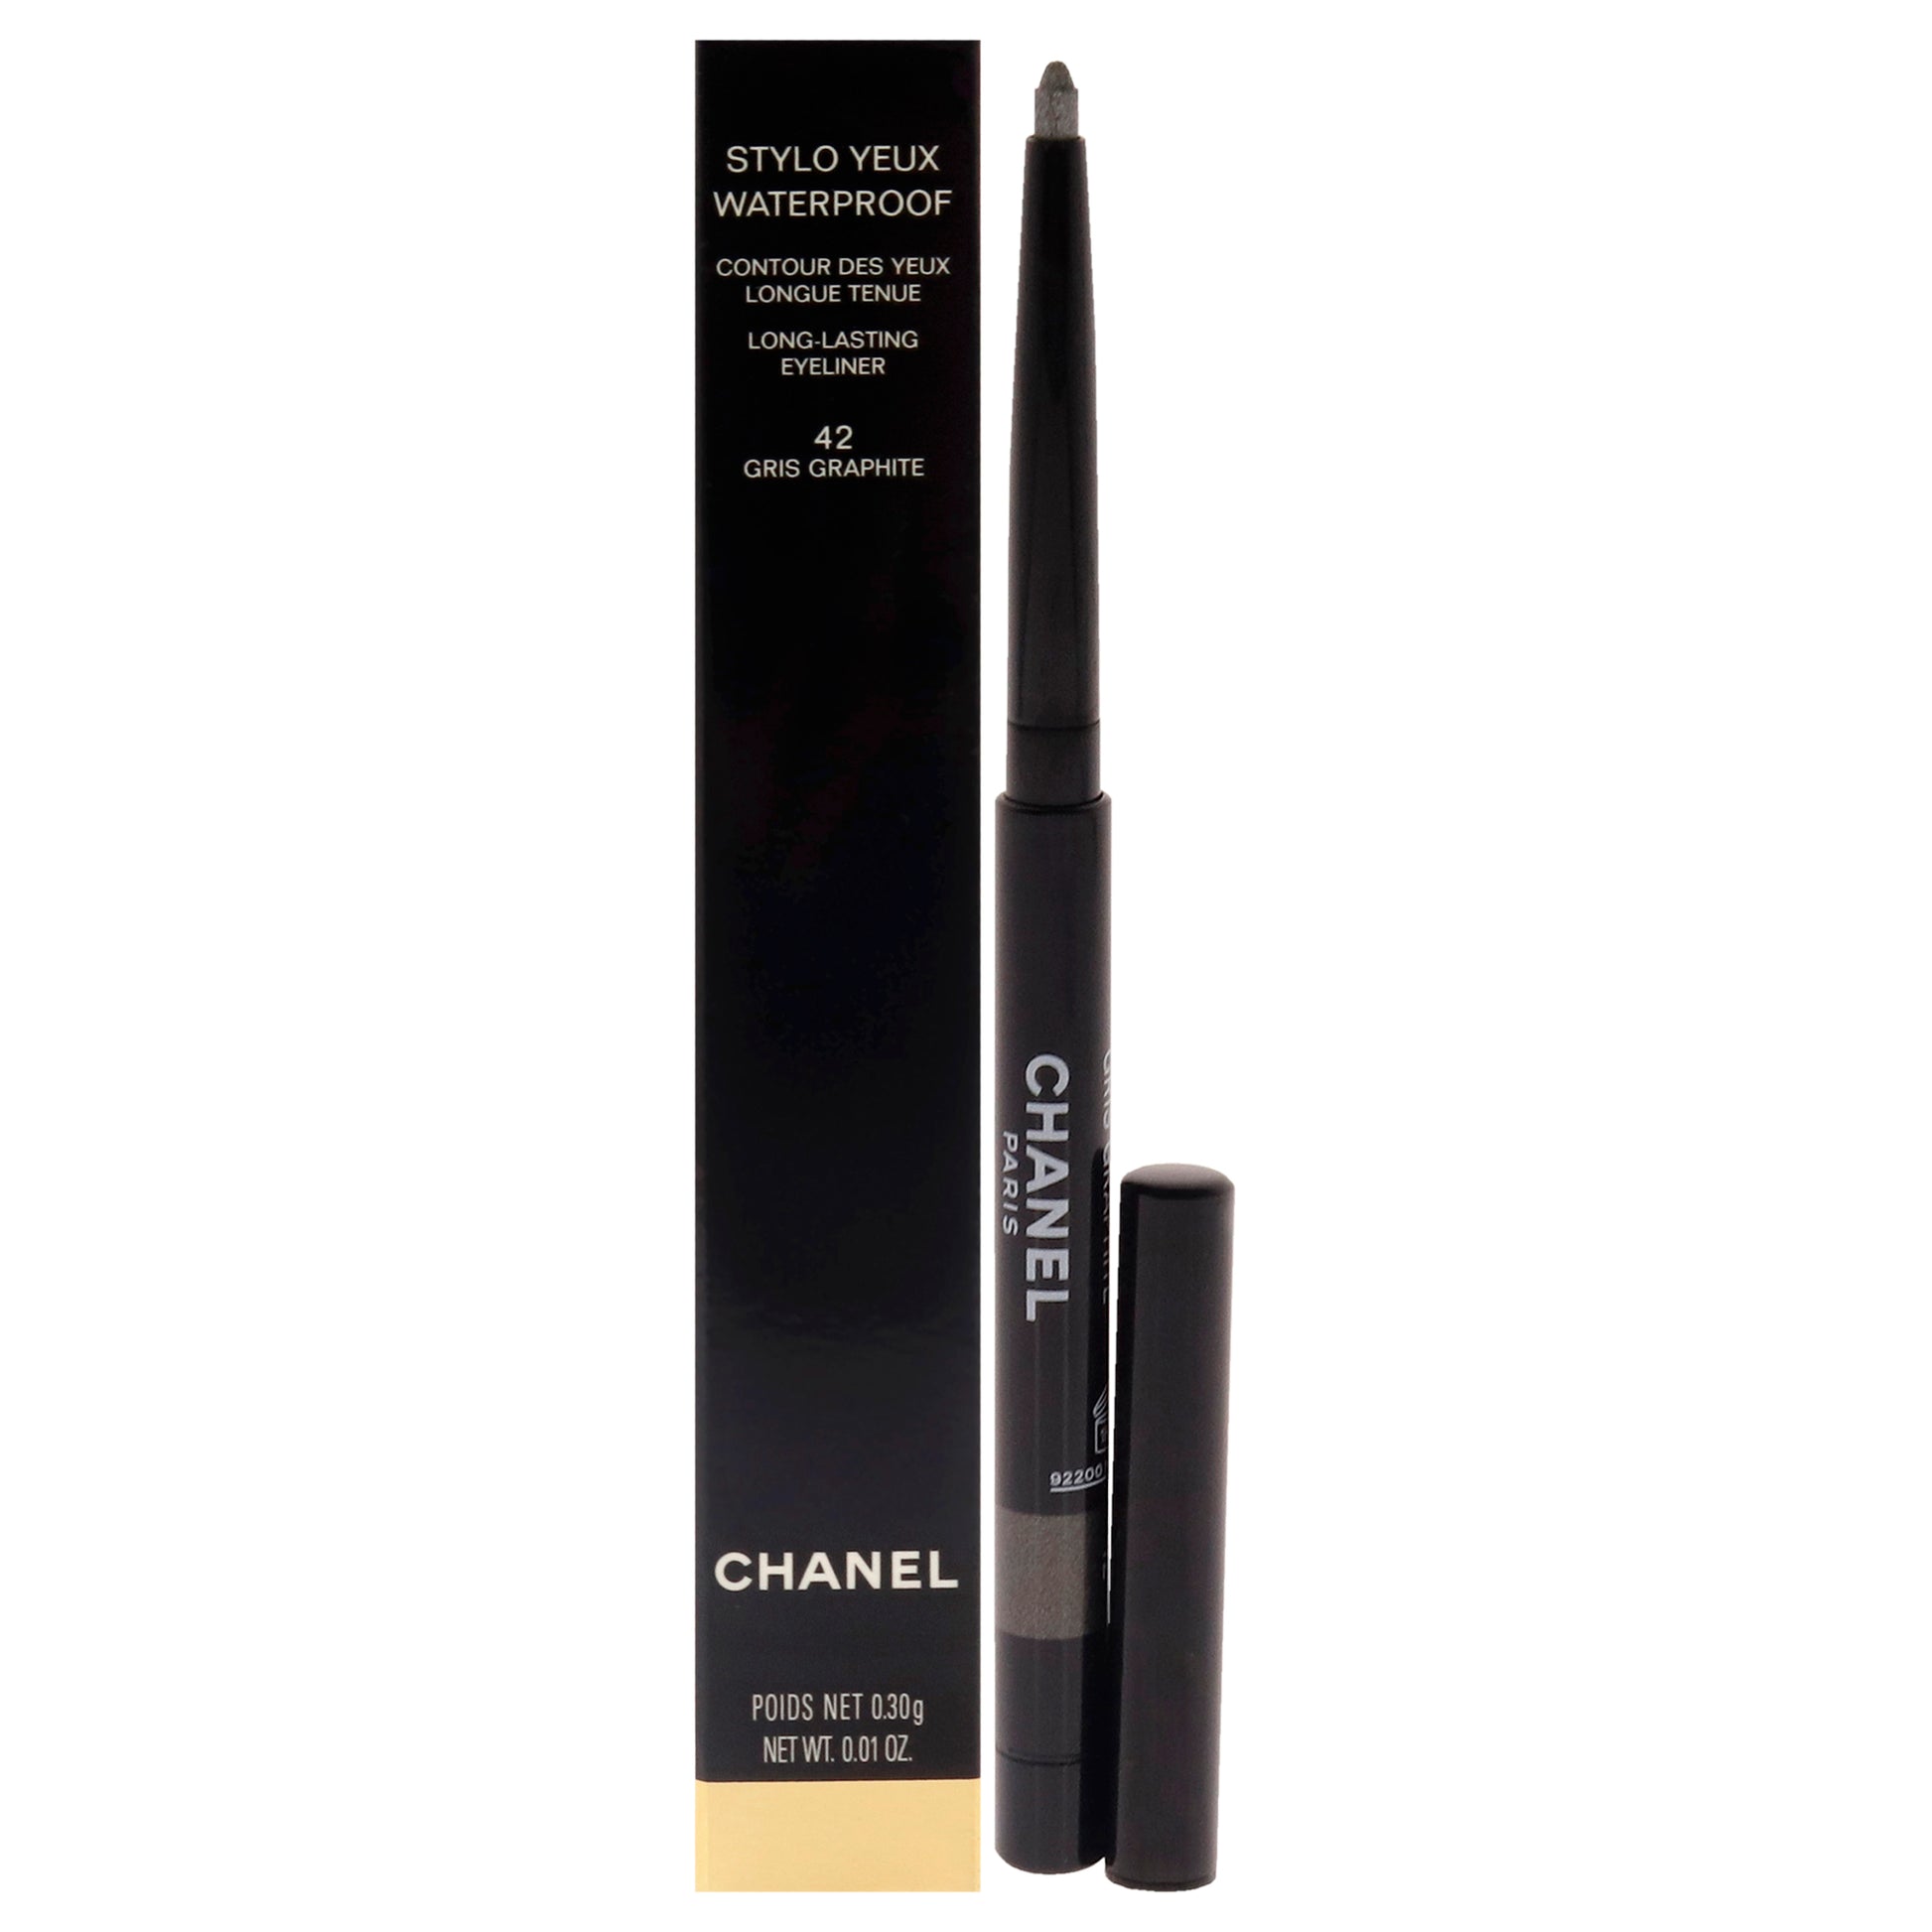 Stylo Yeux Waterproof - 42 Gris Graphite by Chanel for Women - 0.01 oz